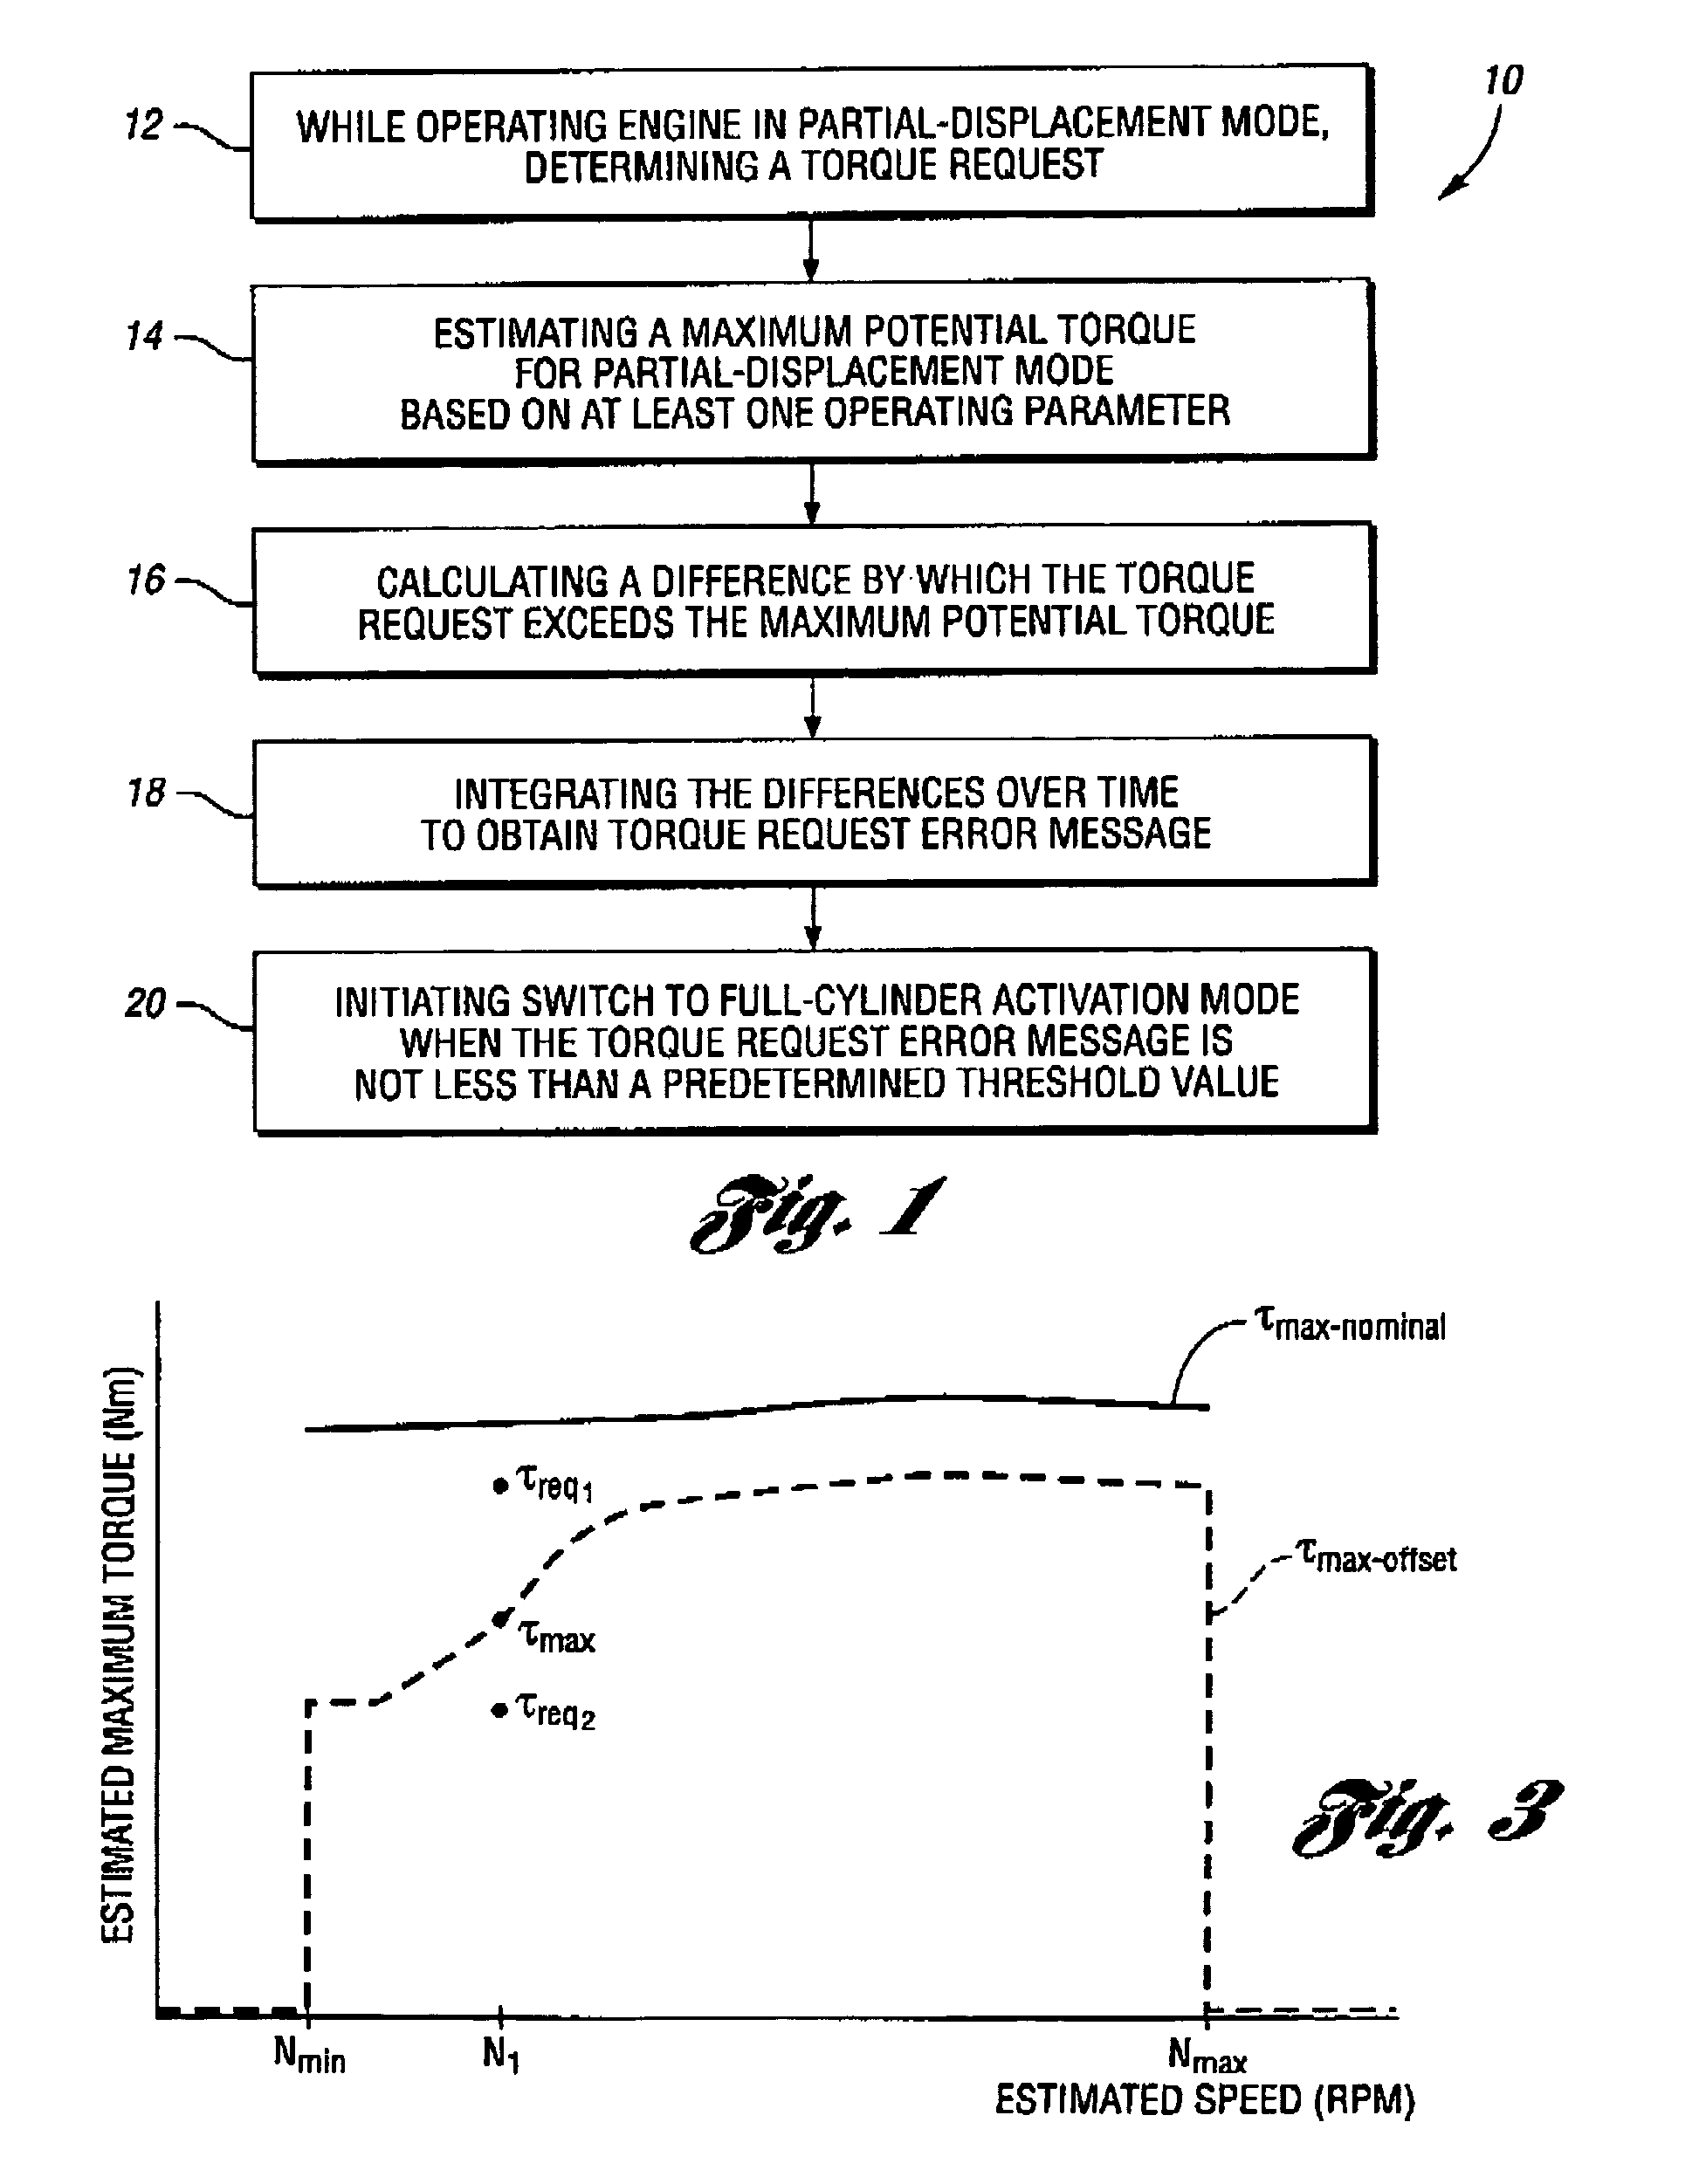 Method and code for controlling reactivation of deactivatable cylinder using torque error integration